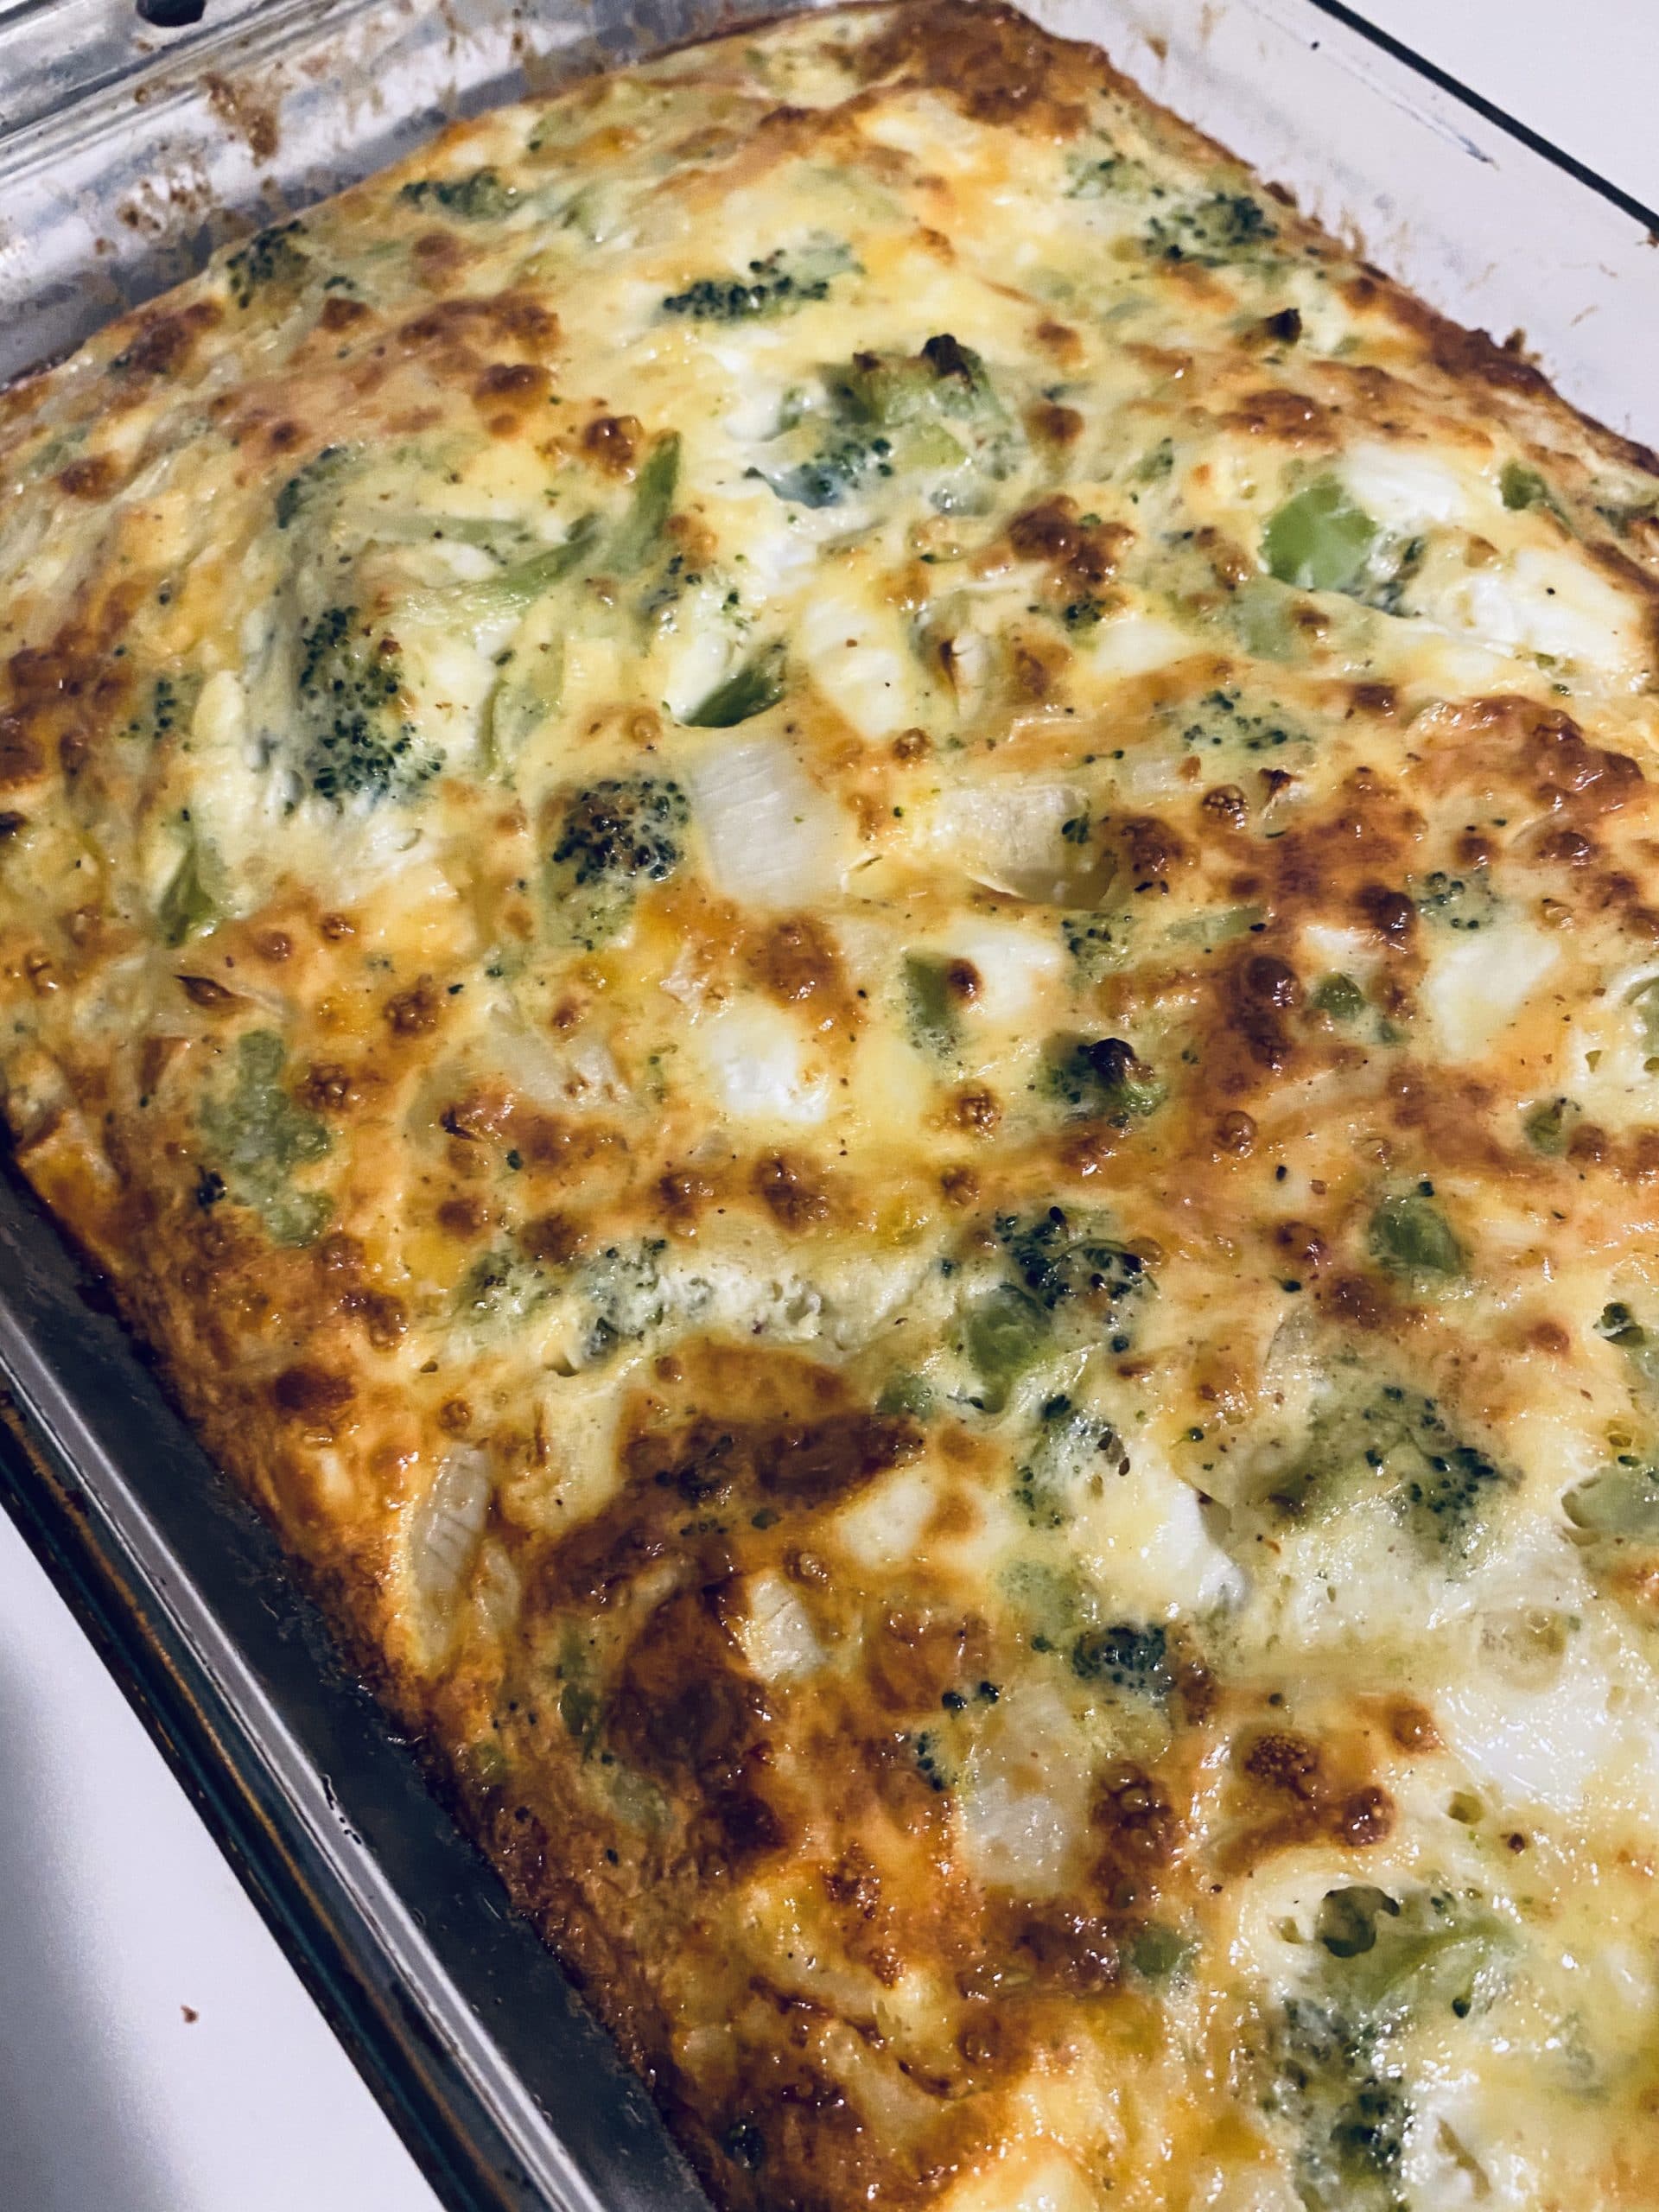 Broccoli Cheese Egg Bake just out of the oven.